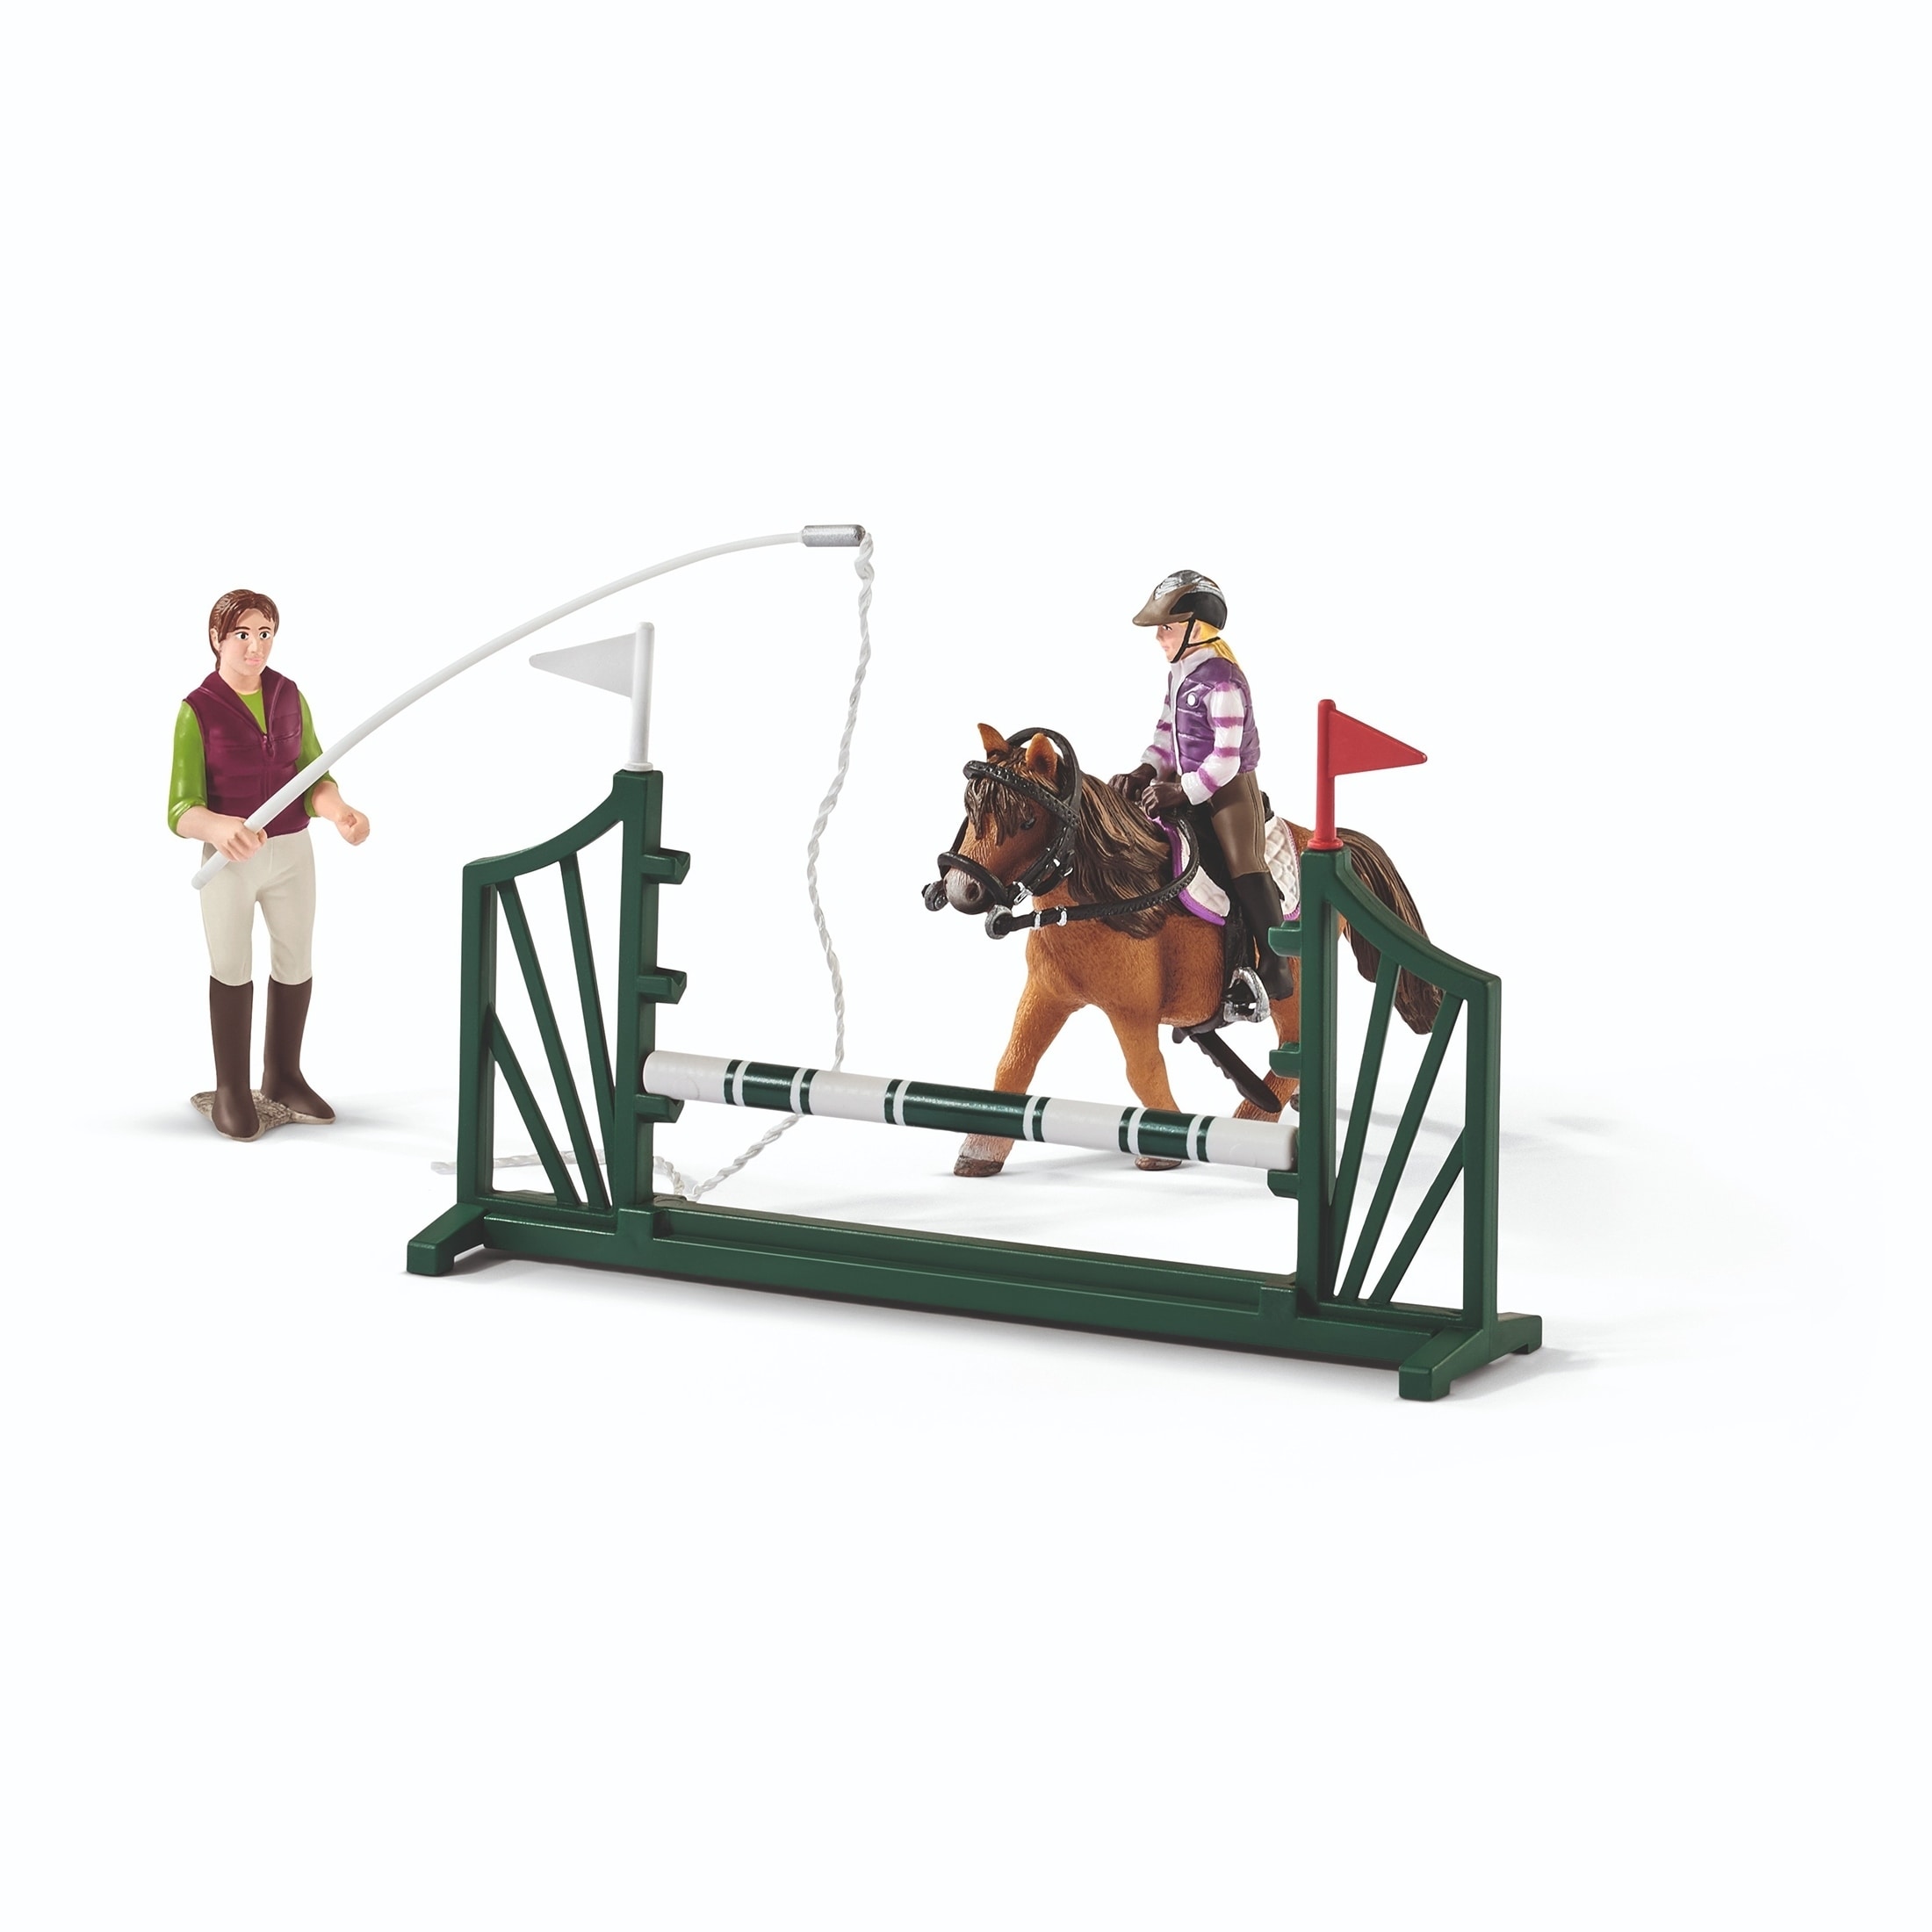 schleich riding centre with rider and horses